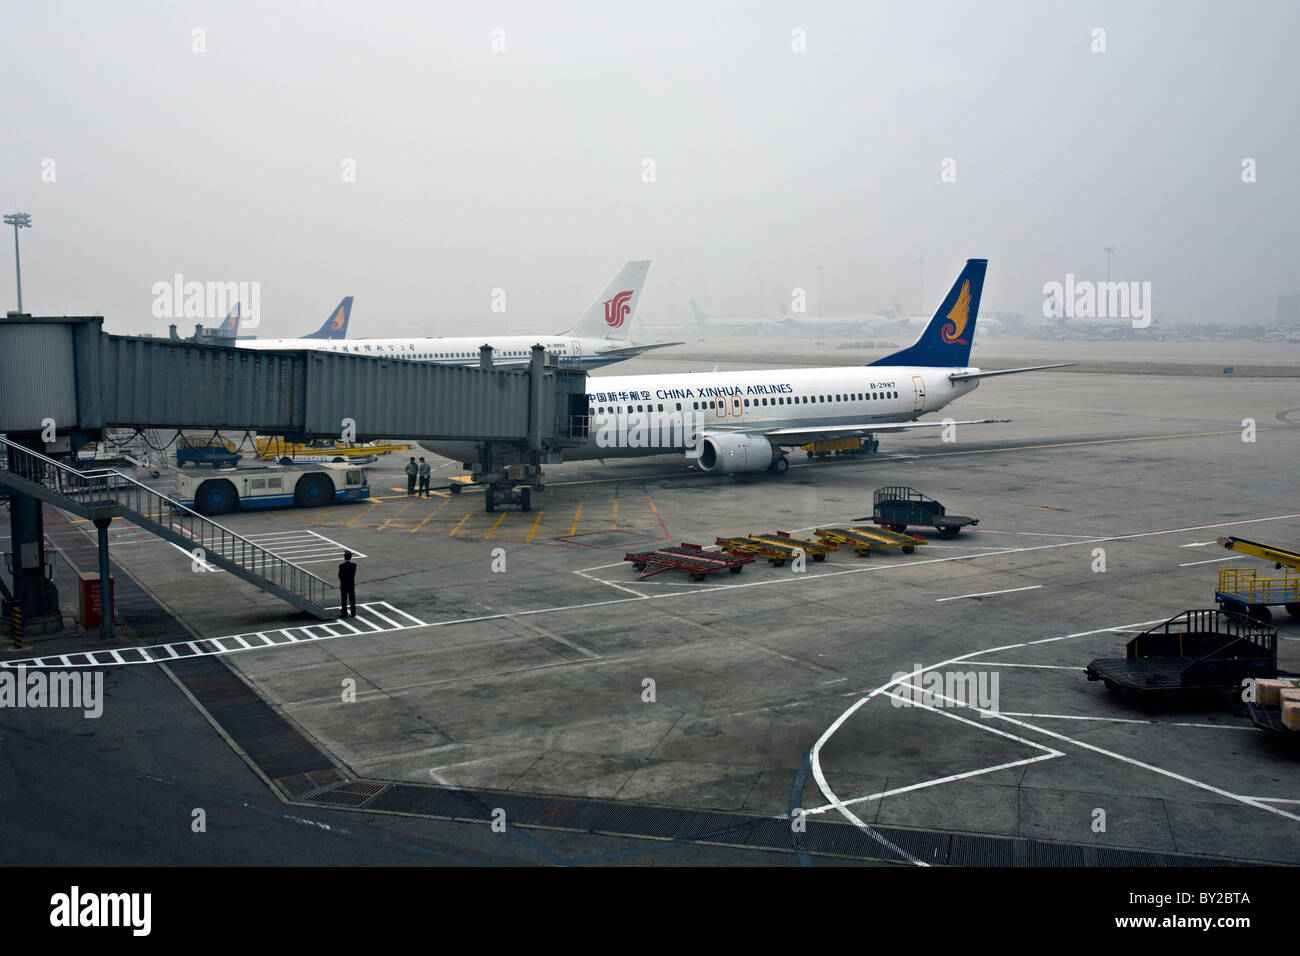 CHINA, BEIJING: China Xinhua Airlines domestic jet at the gate at Beijing Capital International Airport through air pollution Stock Photo